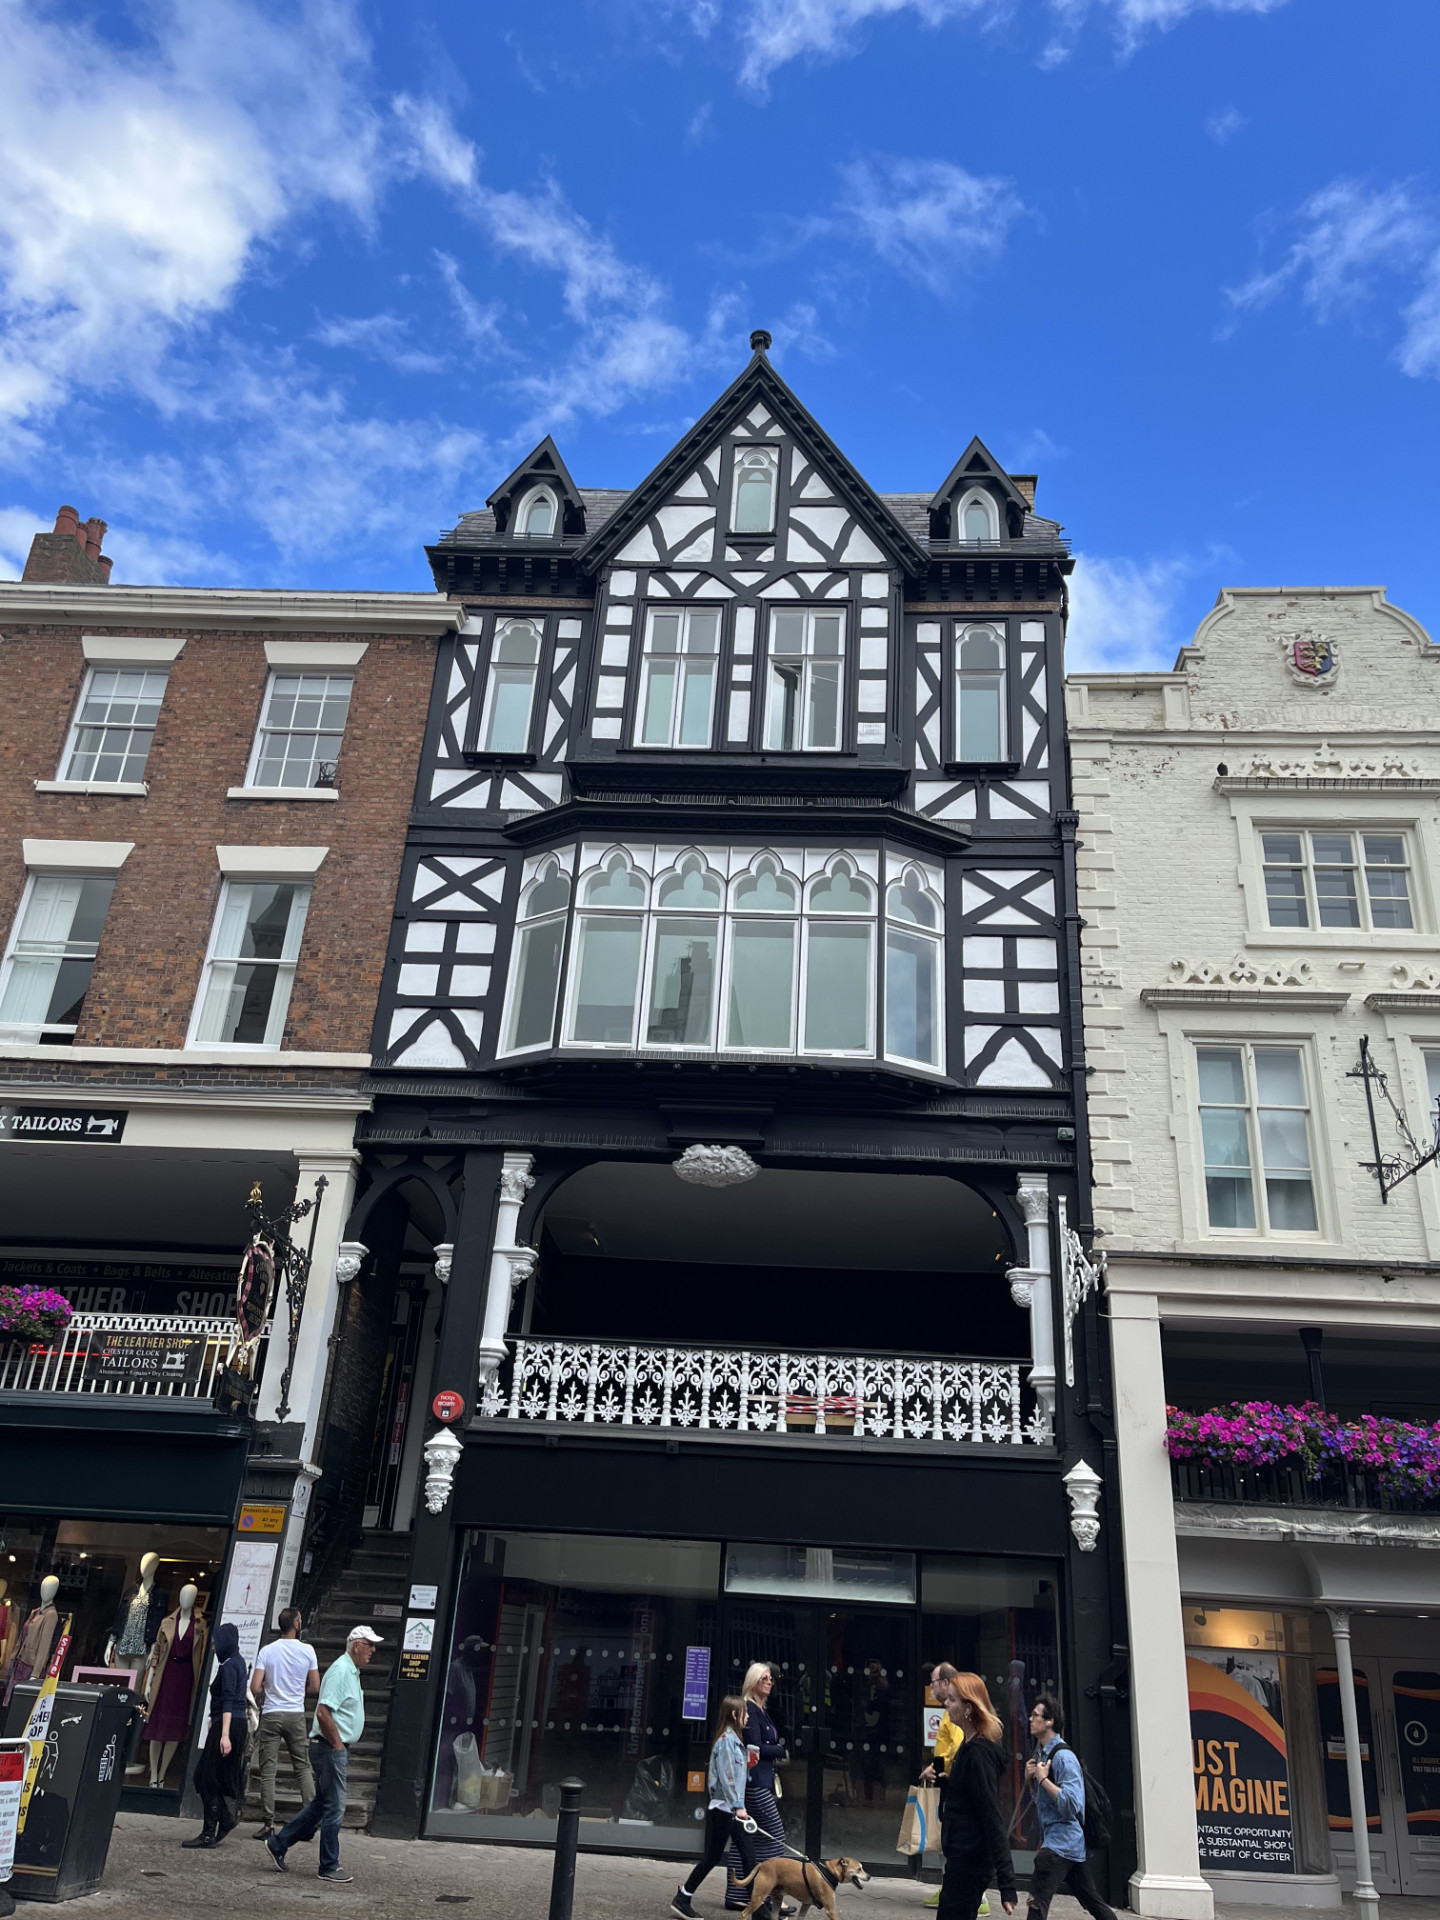 External elivation view of 19 Eastgate, Chester, Cheshire, 2023